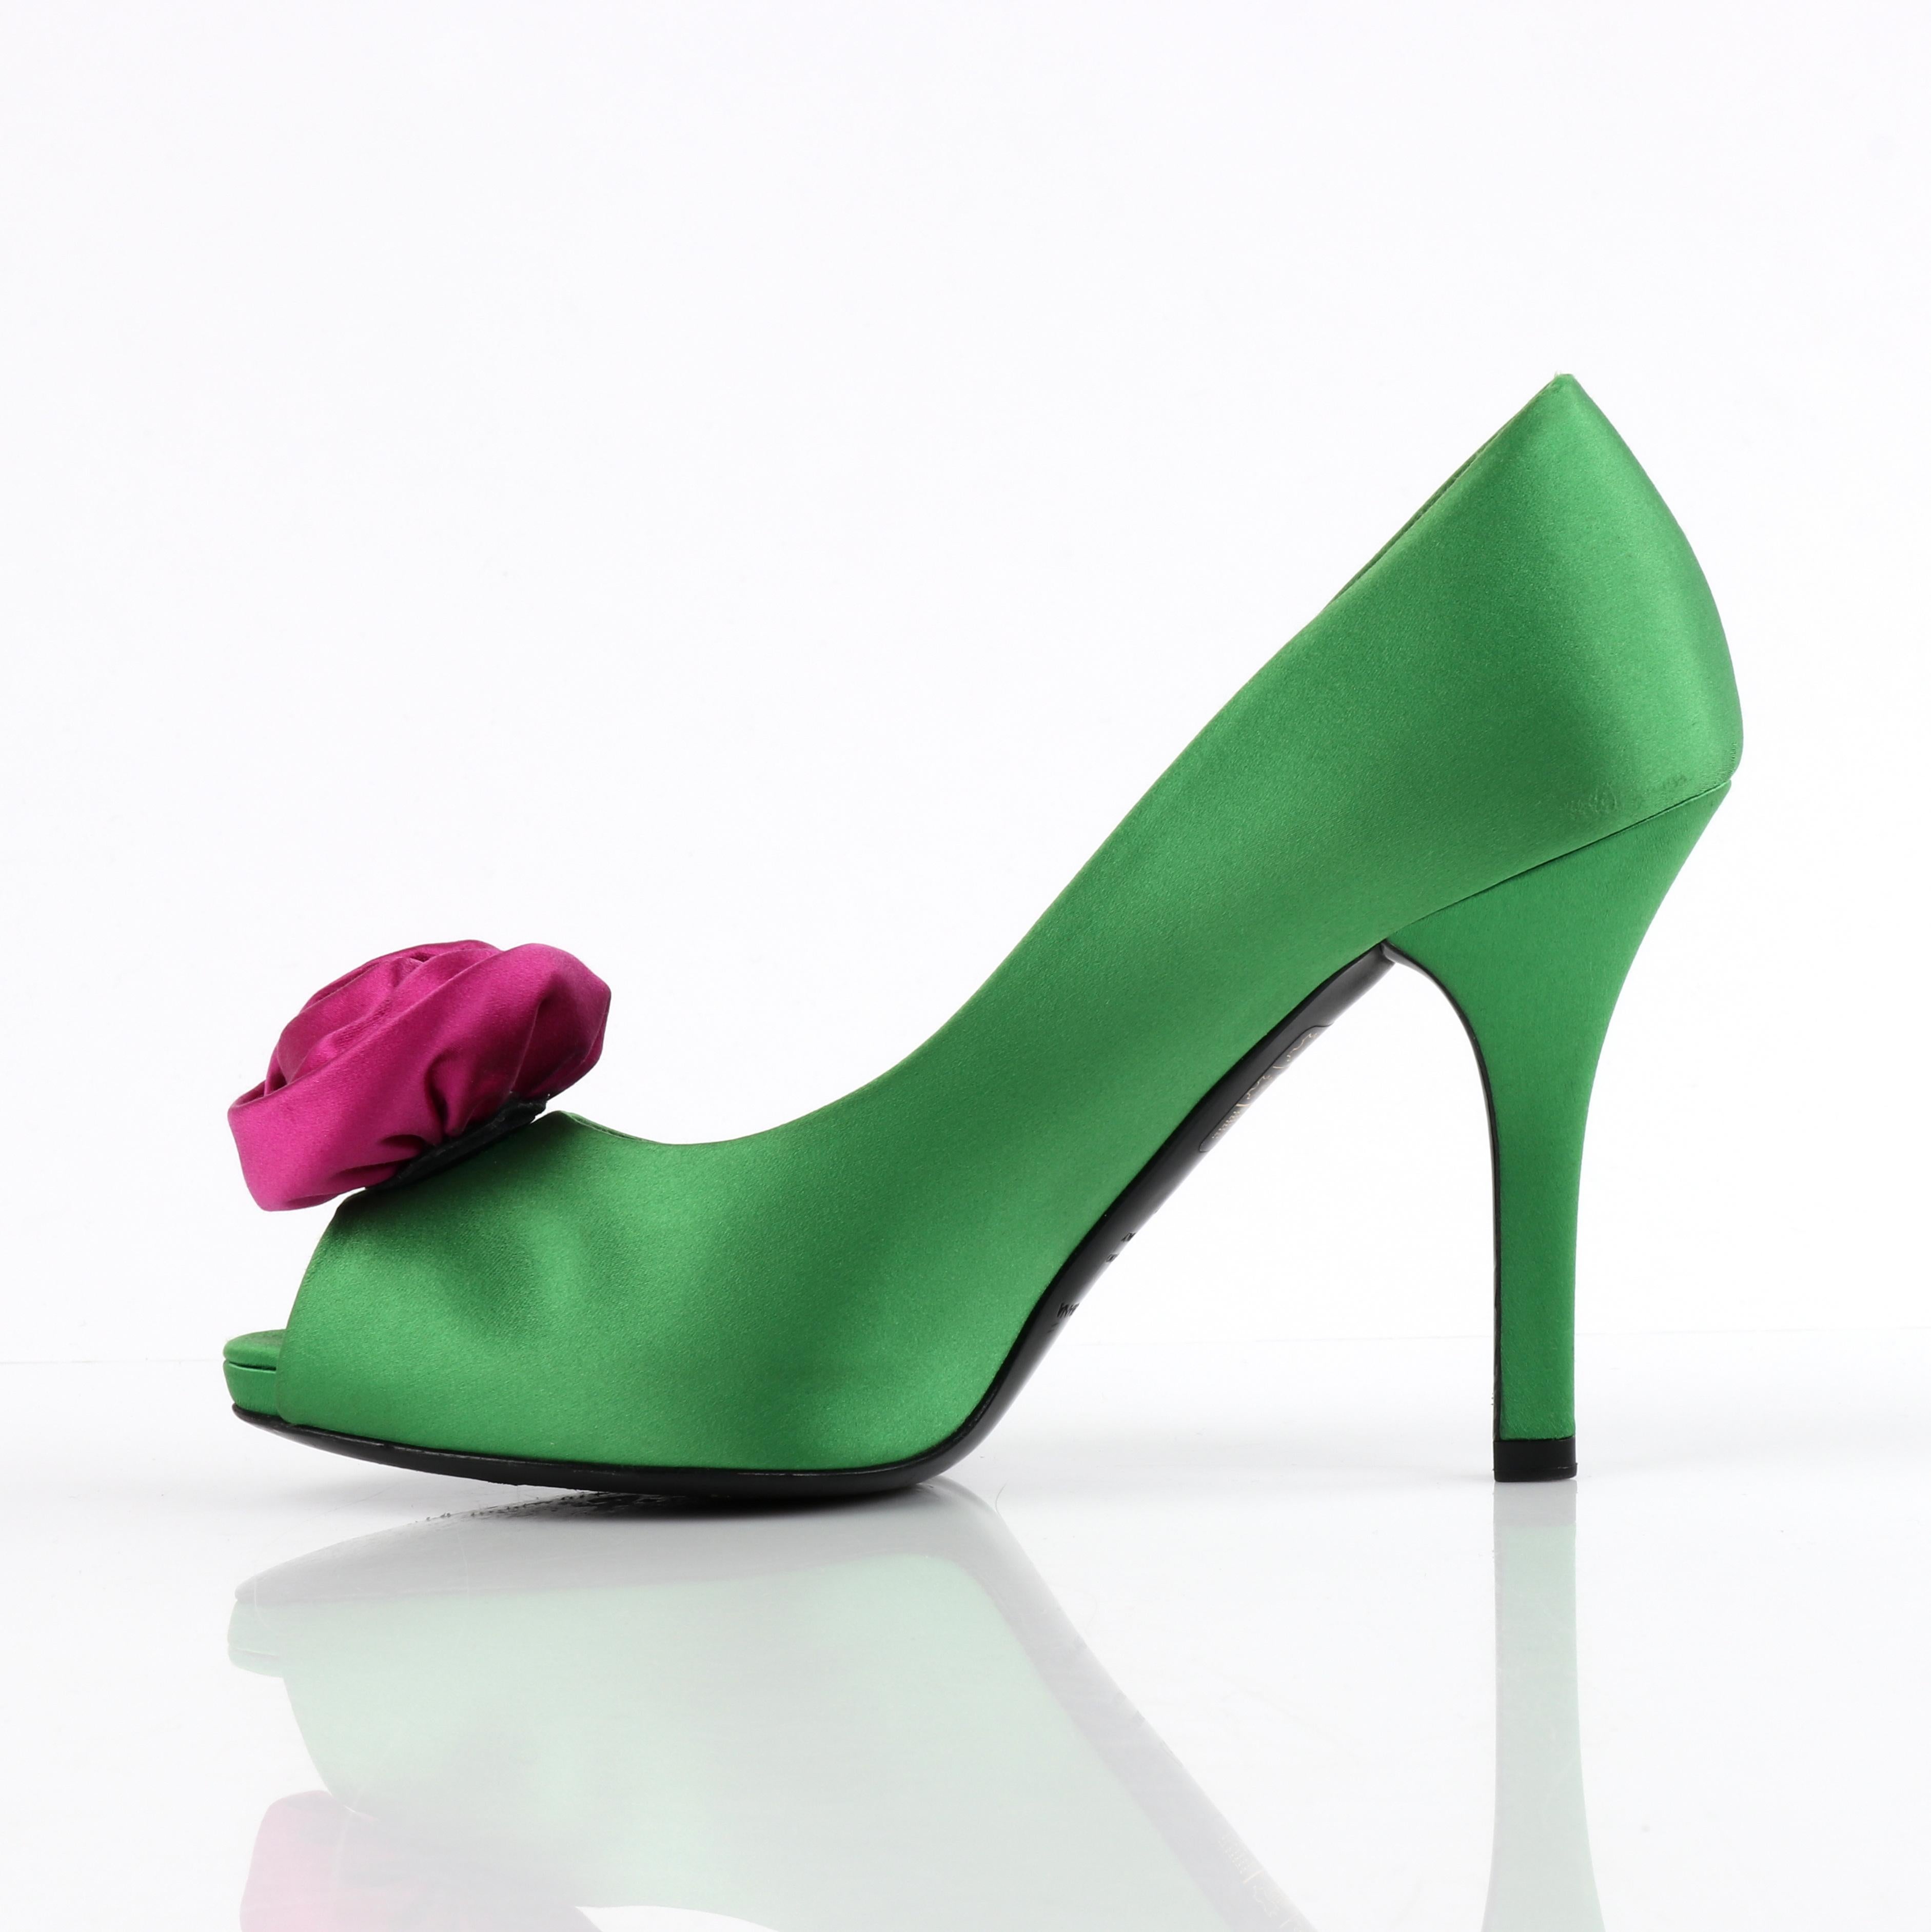 green and pink heels